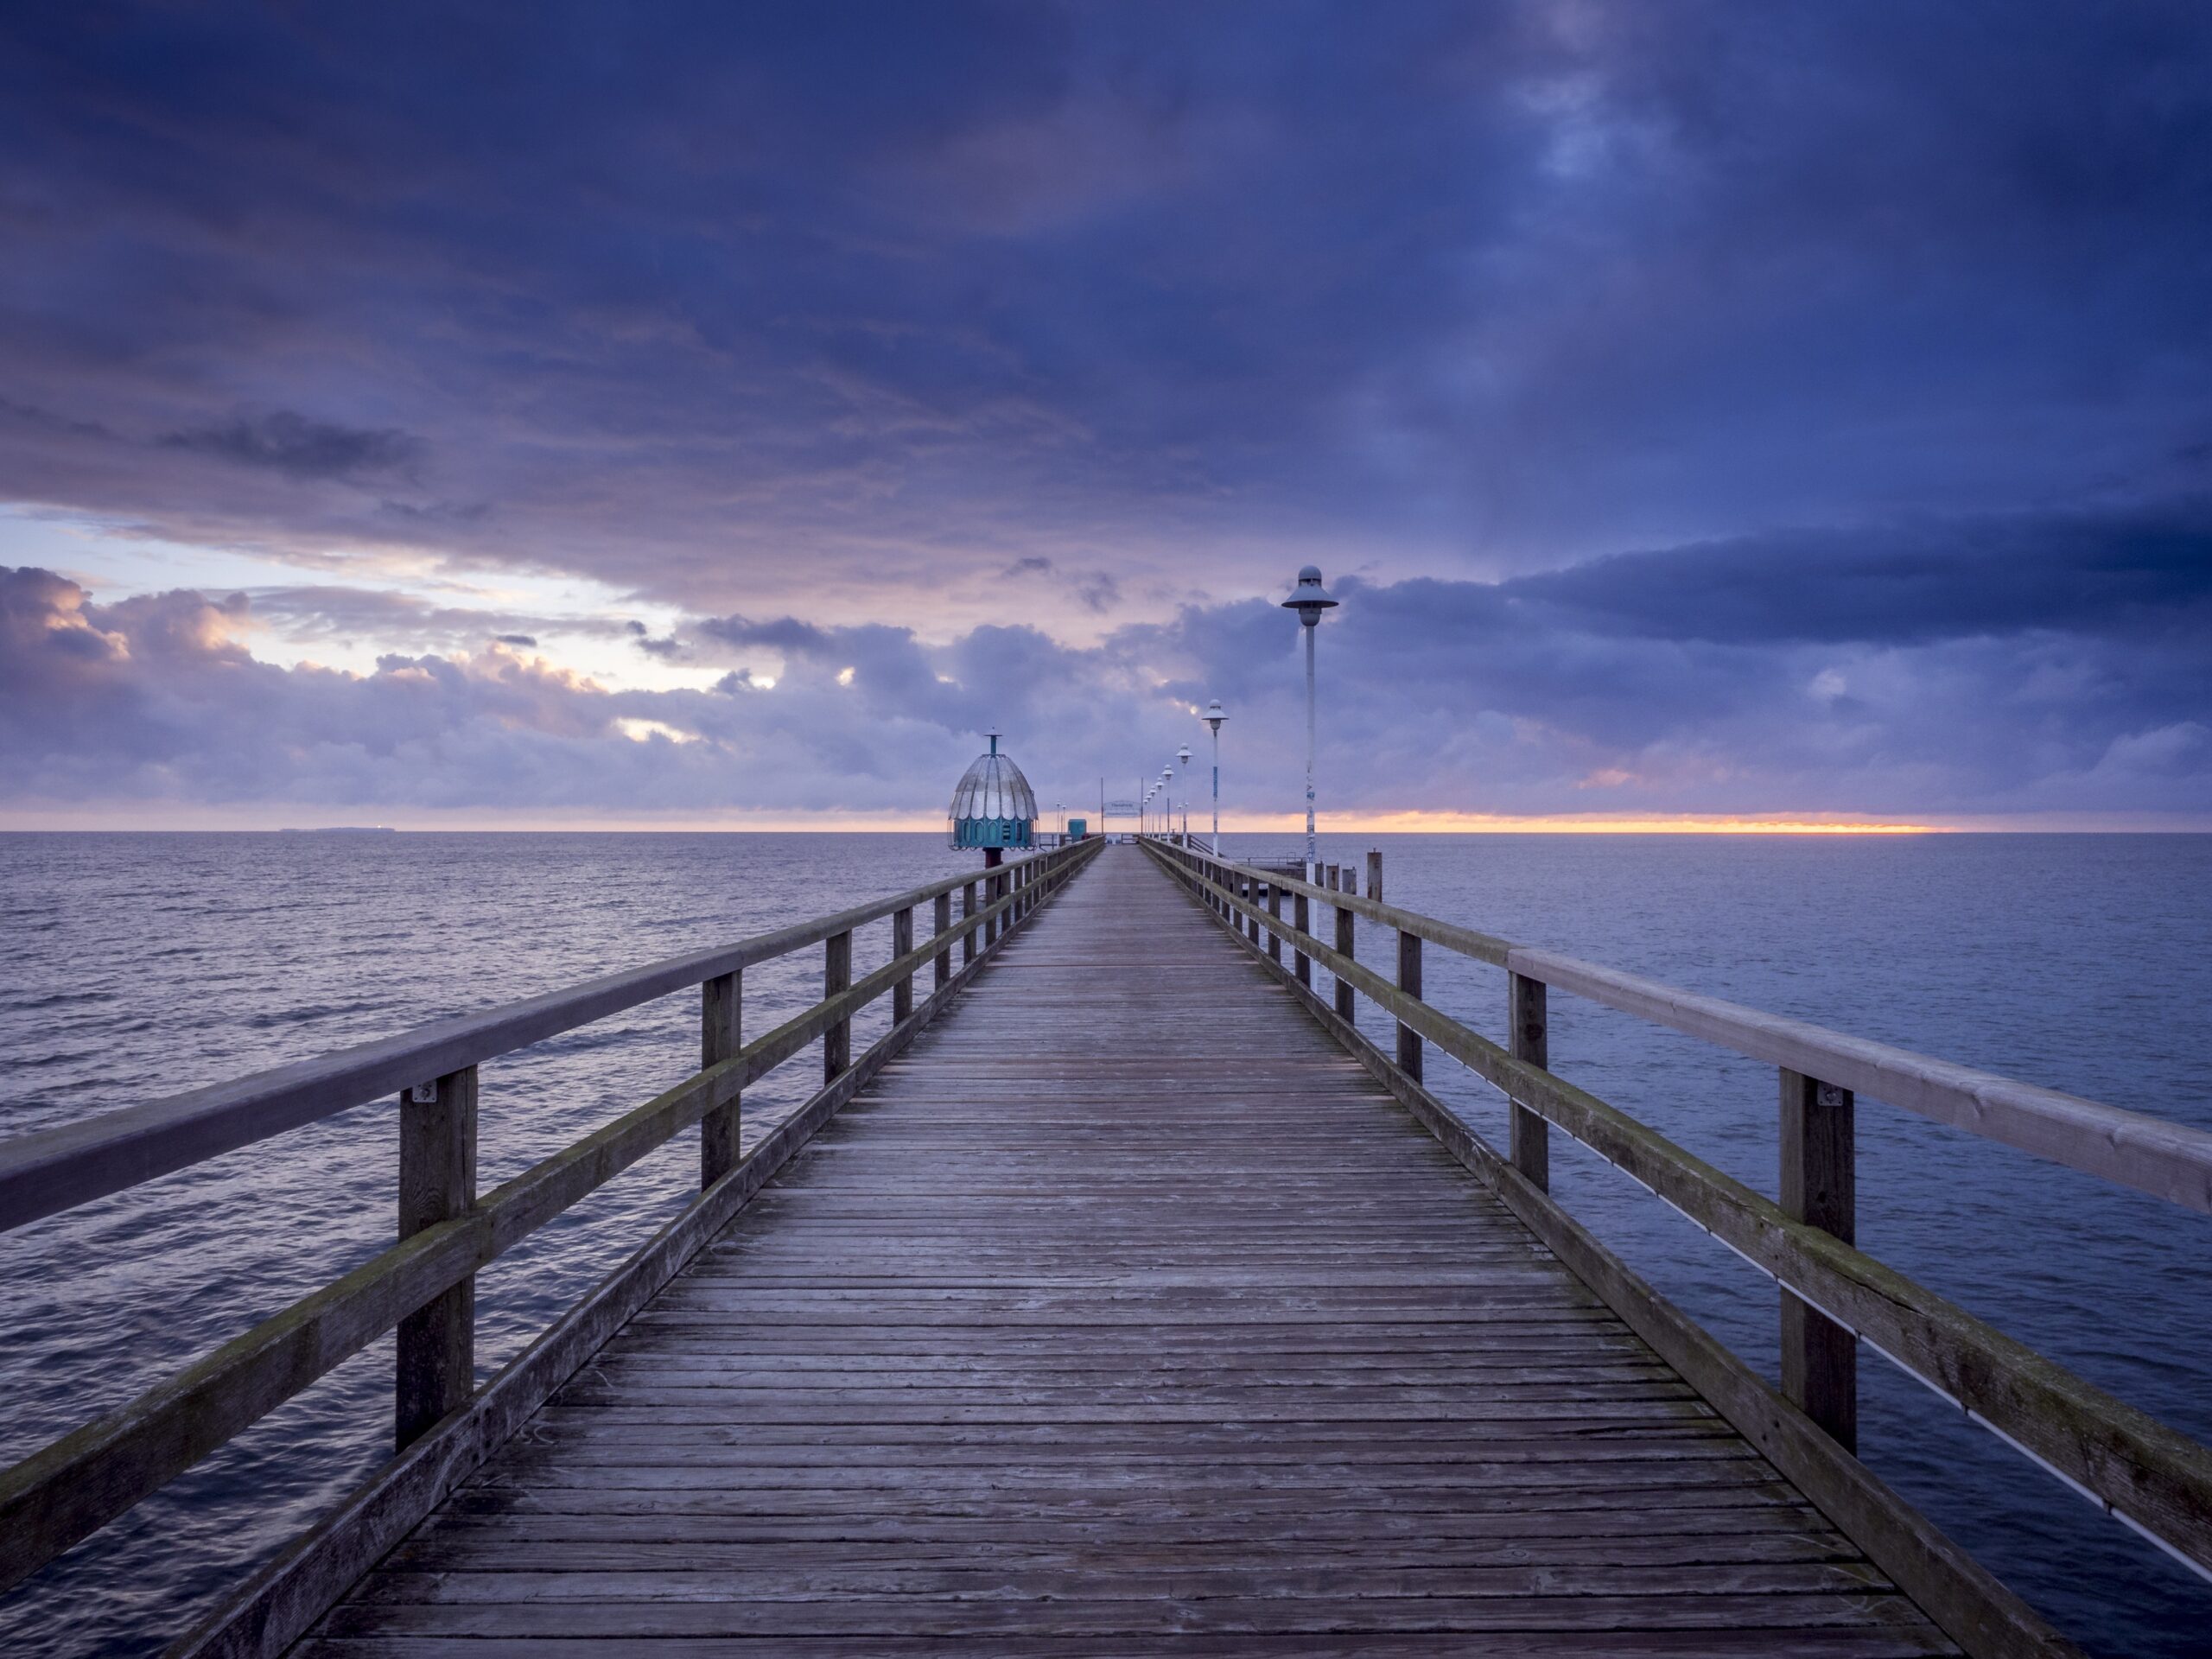 Image of pier boardwalk with blue sky and blue water below.